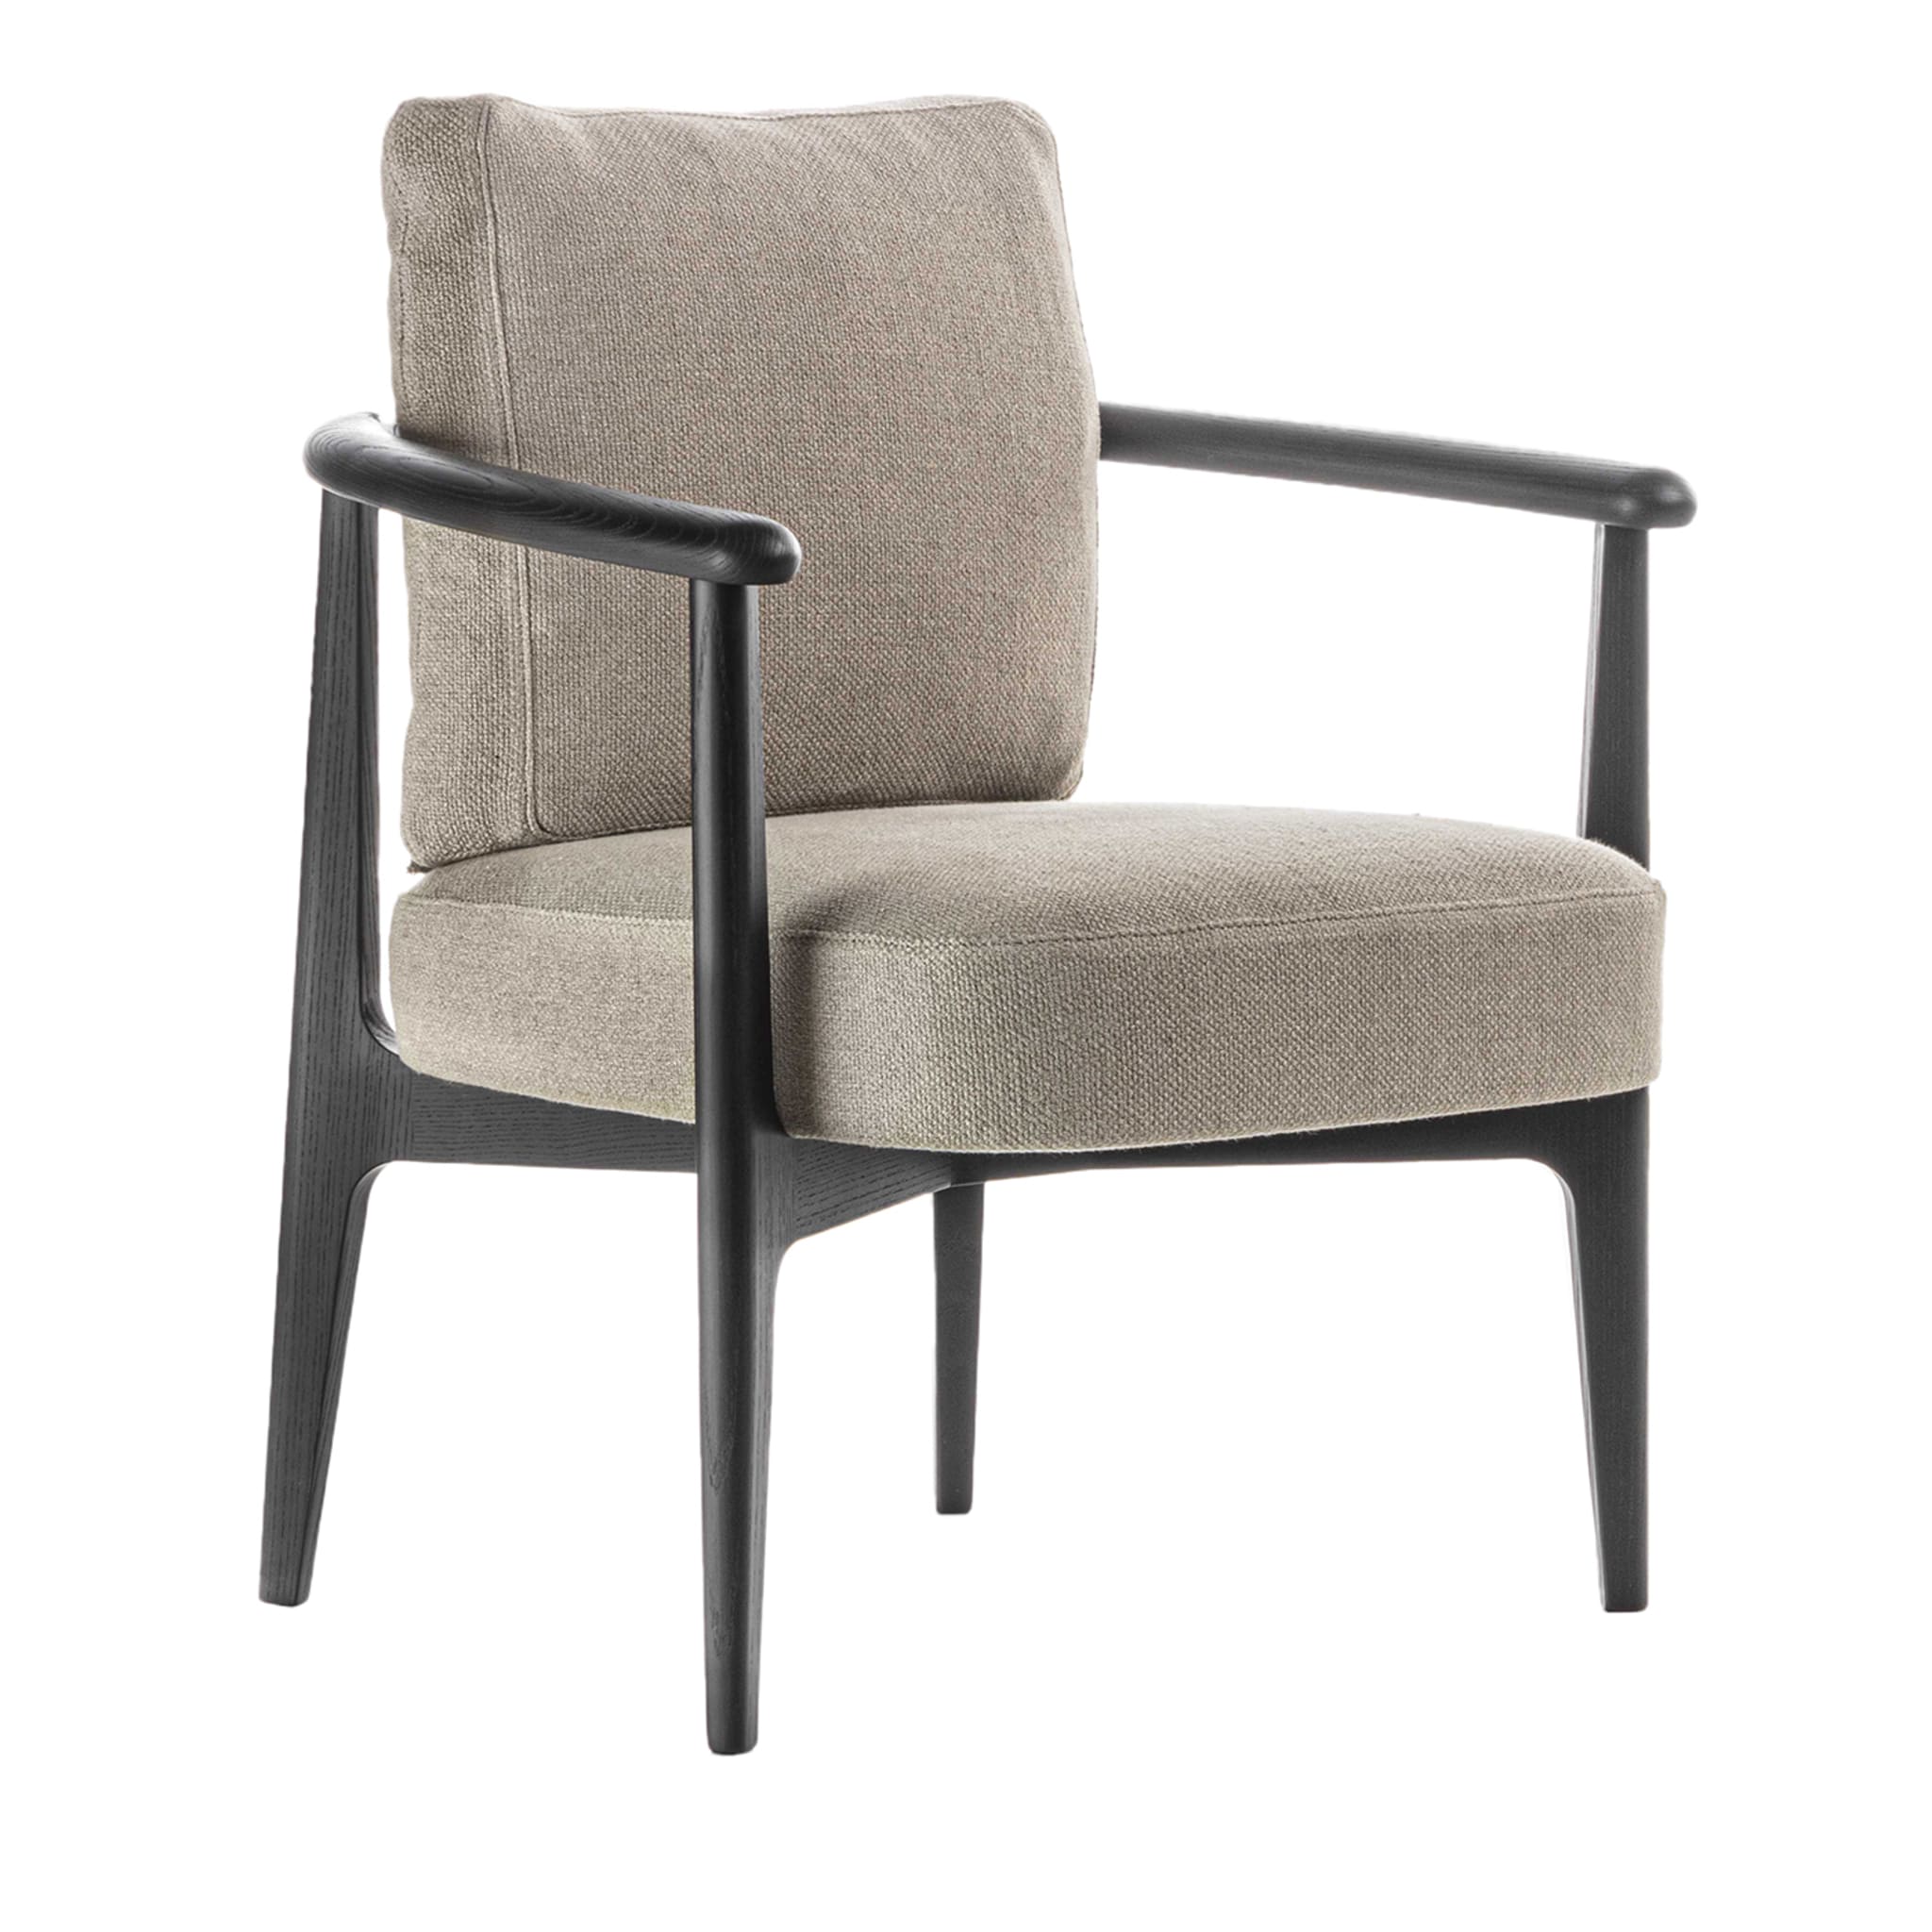 Greta Beige Chair With Arms - Main view